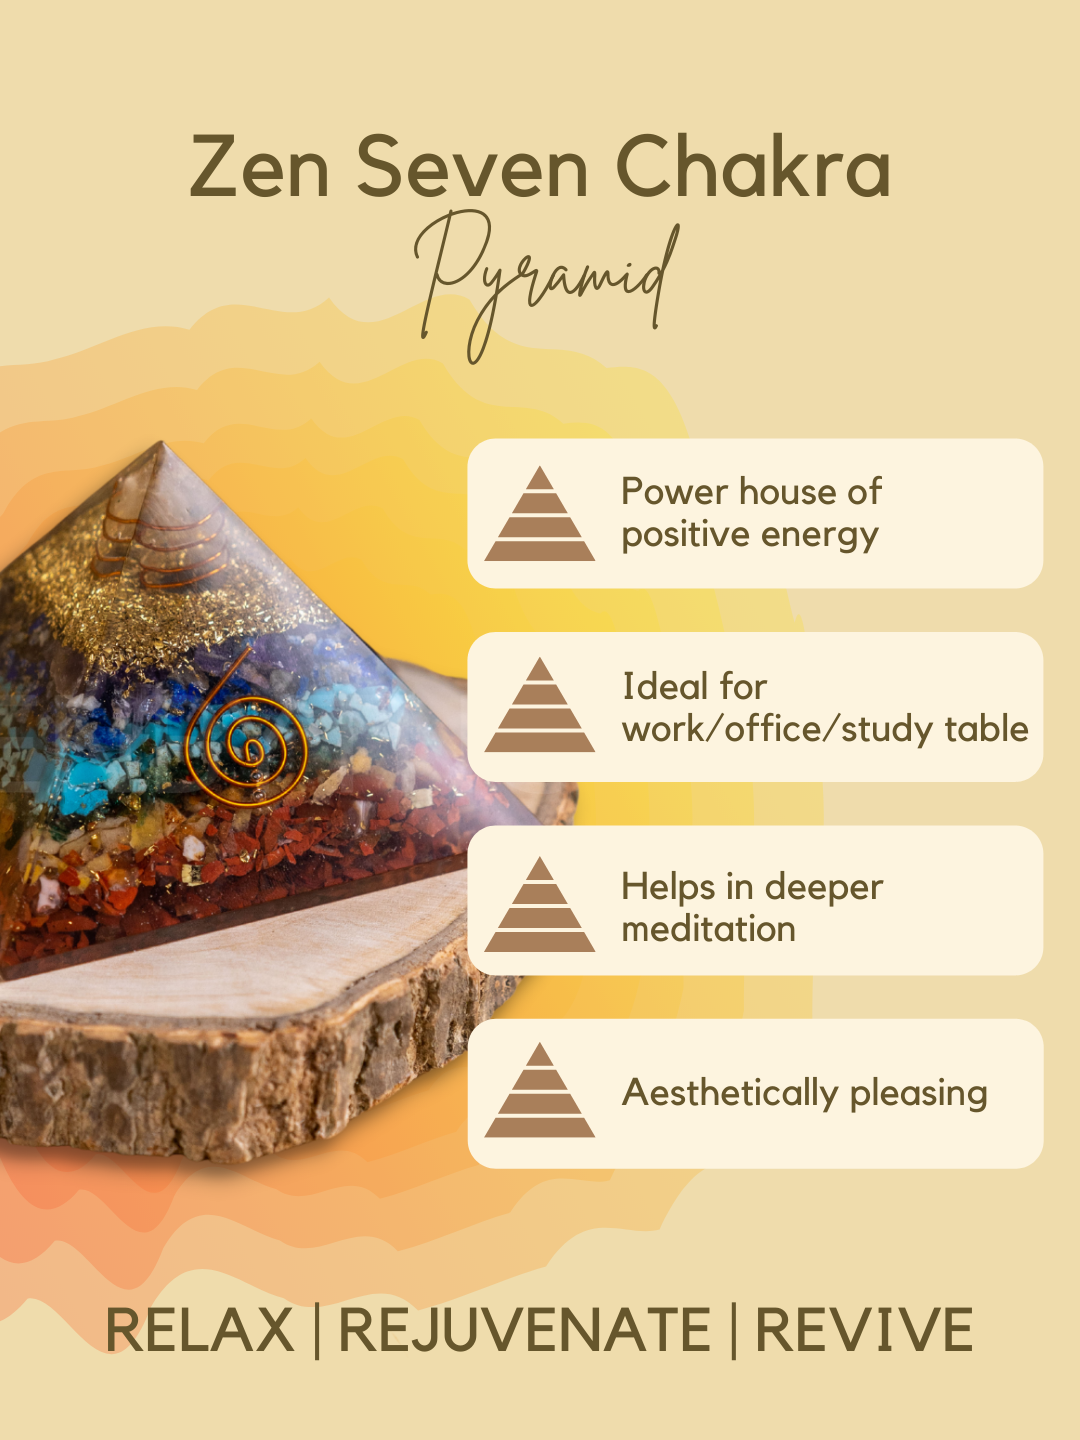 Zen Seven Chakra Orgonite Pyramid For Overall Wellbeing The Zen Crystals